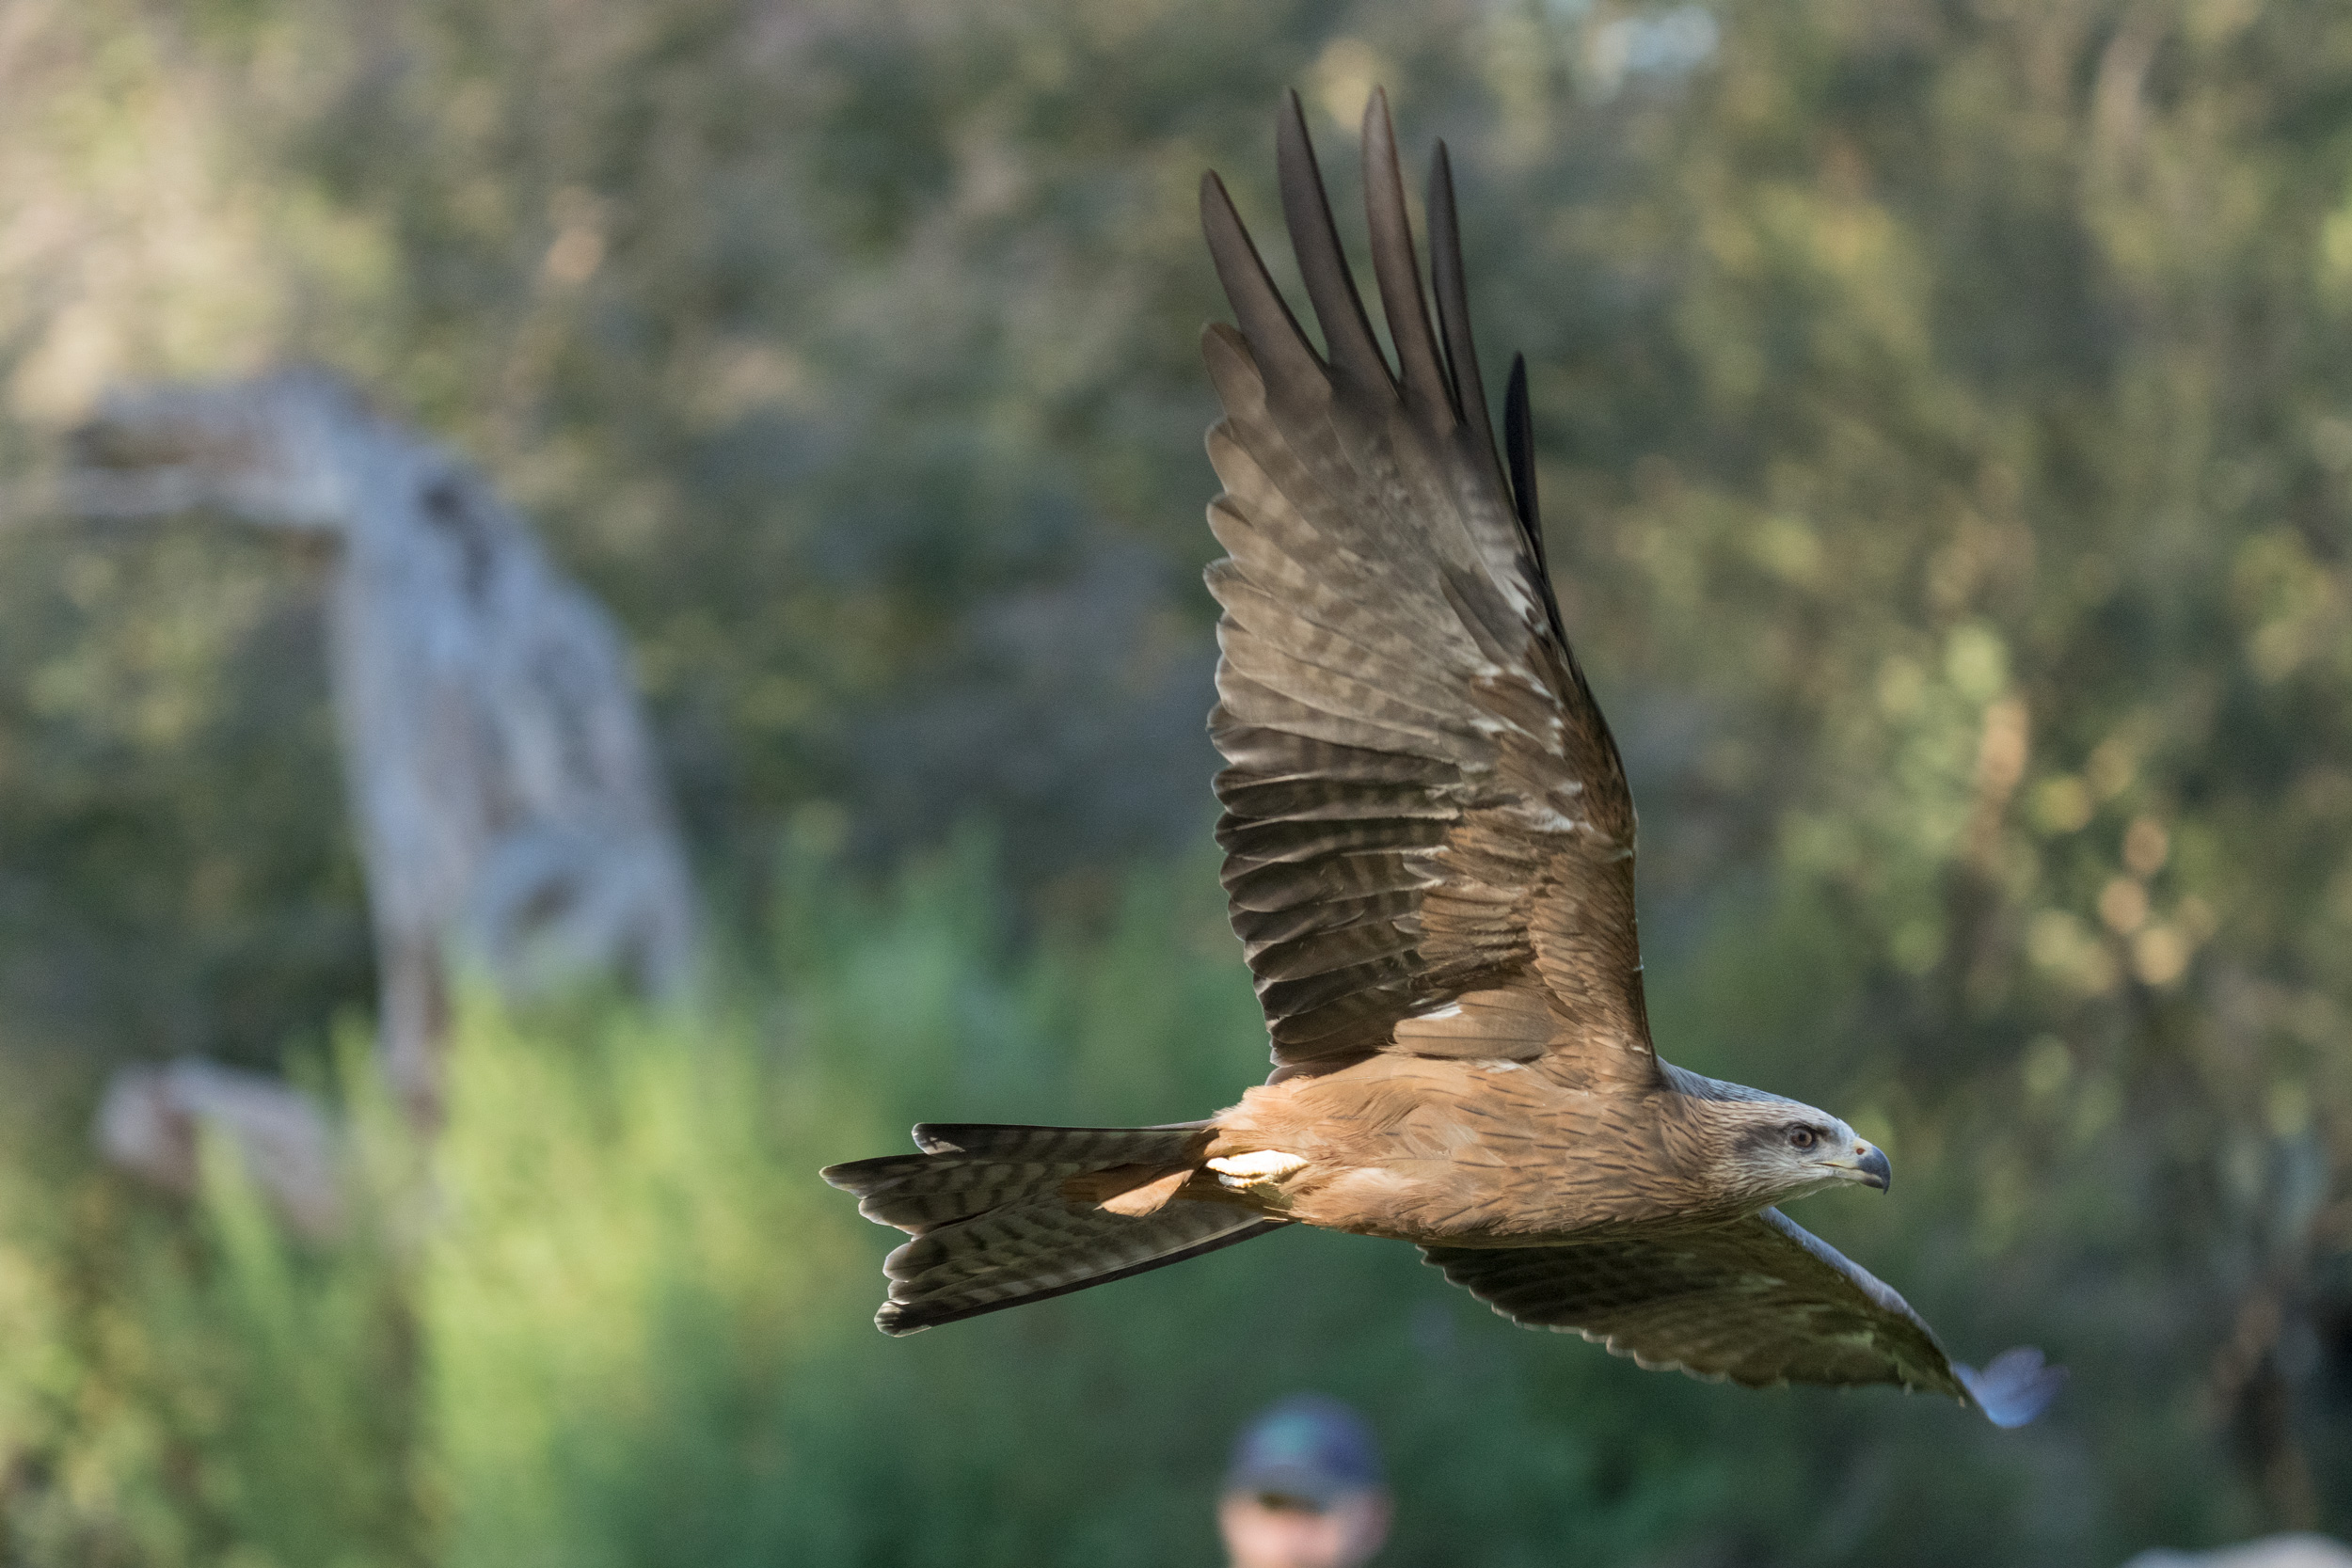 Sony Alpha 1 camera – mid-high ISO impact on images of a black kite